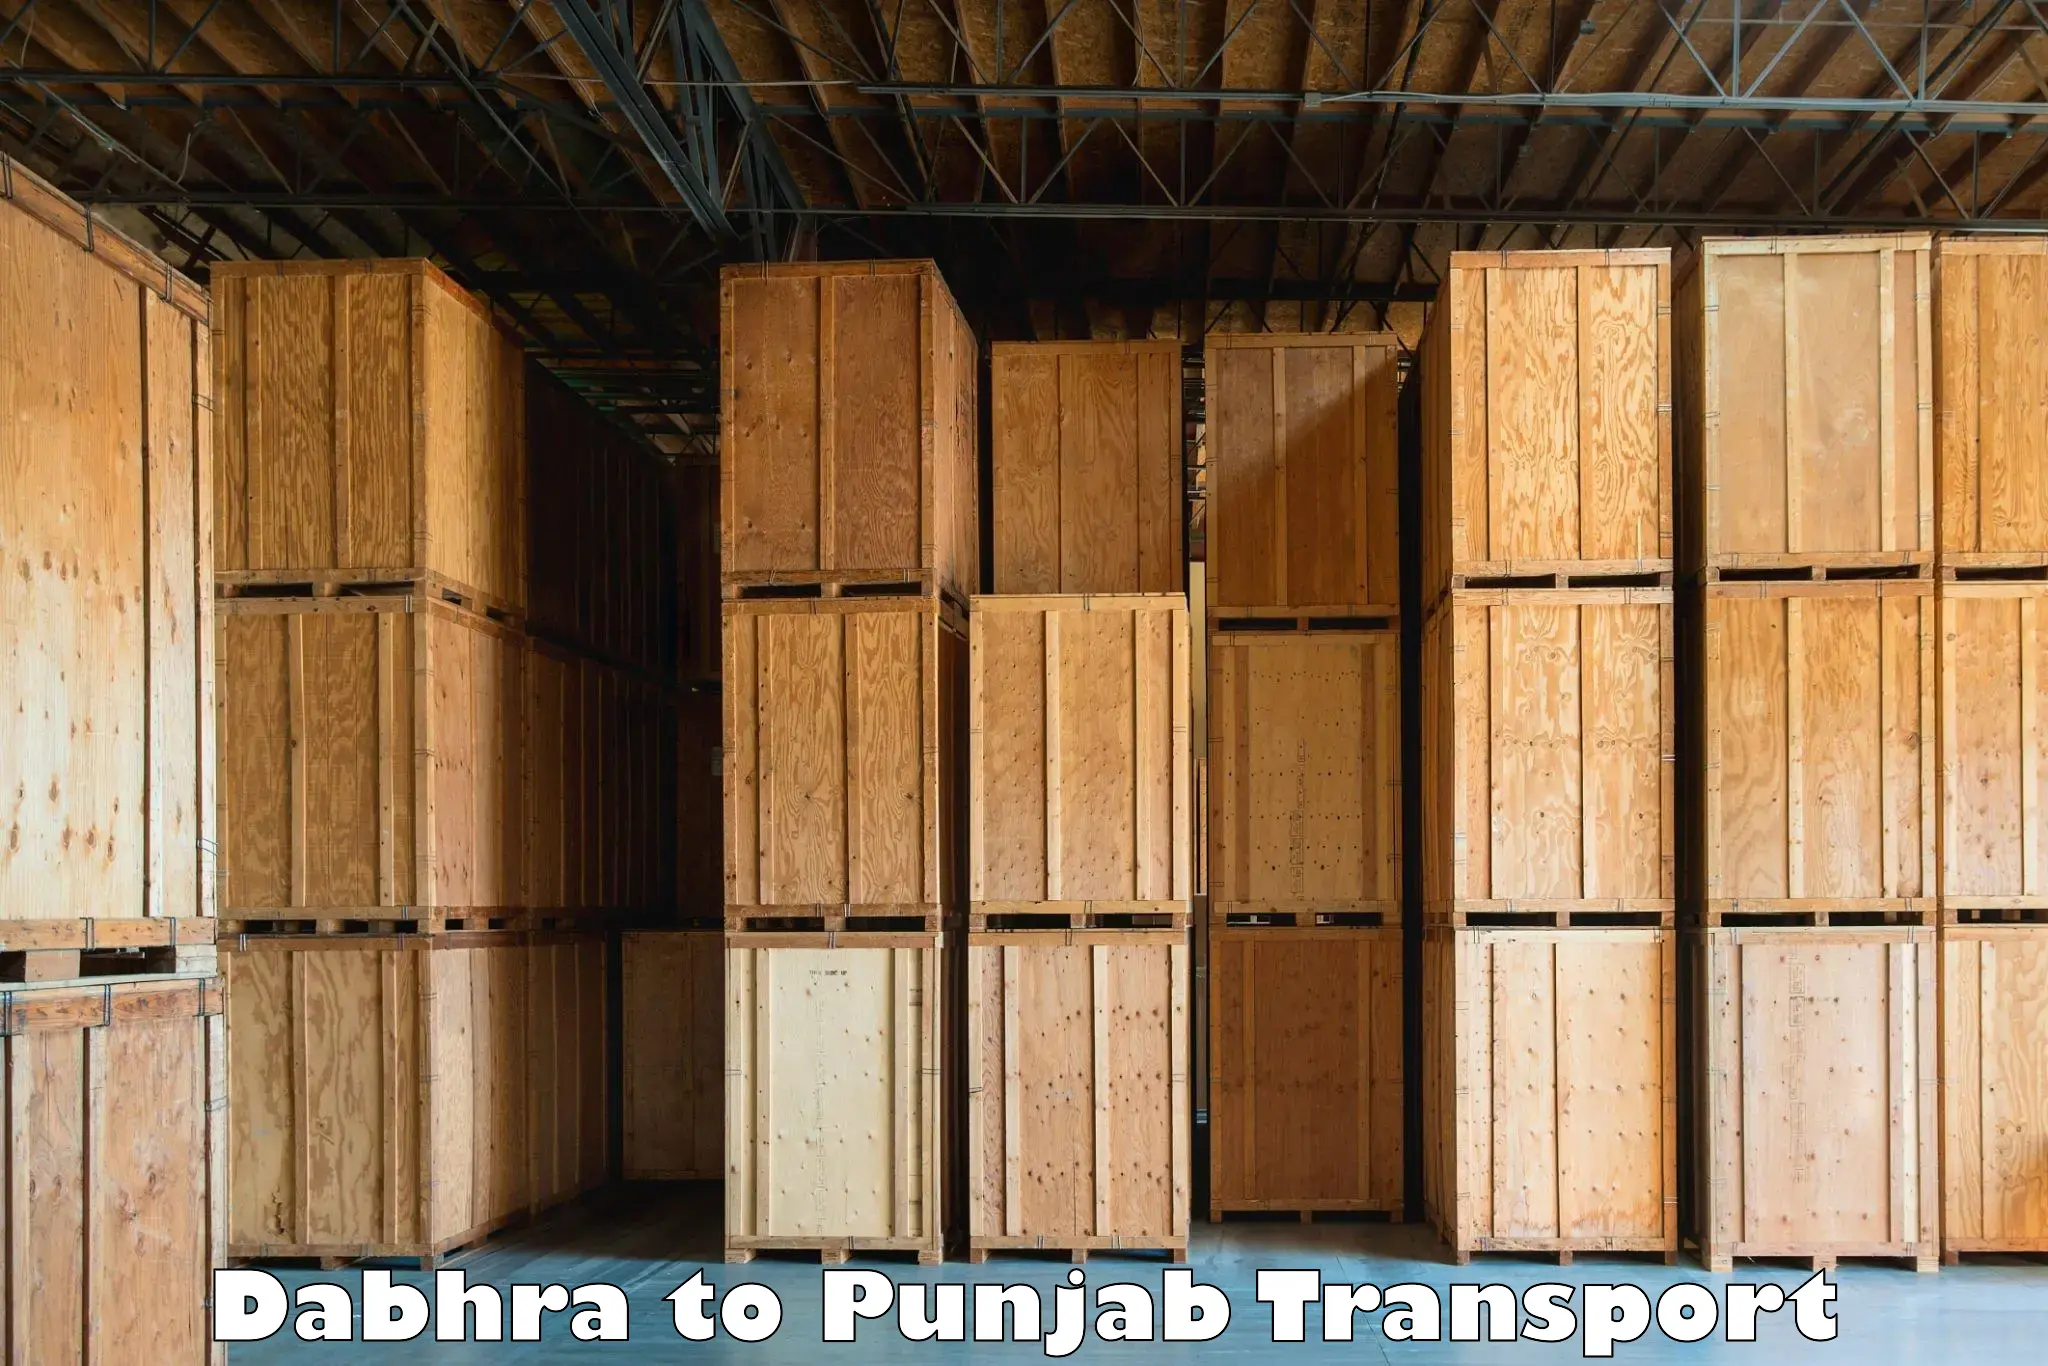 Transport shared services Dabhra to Talwara